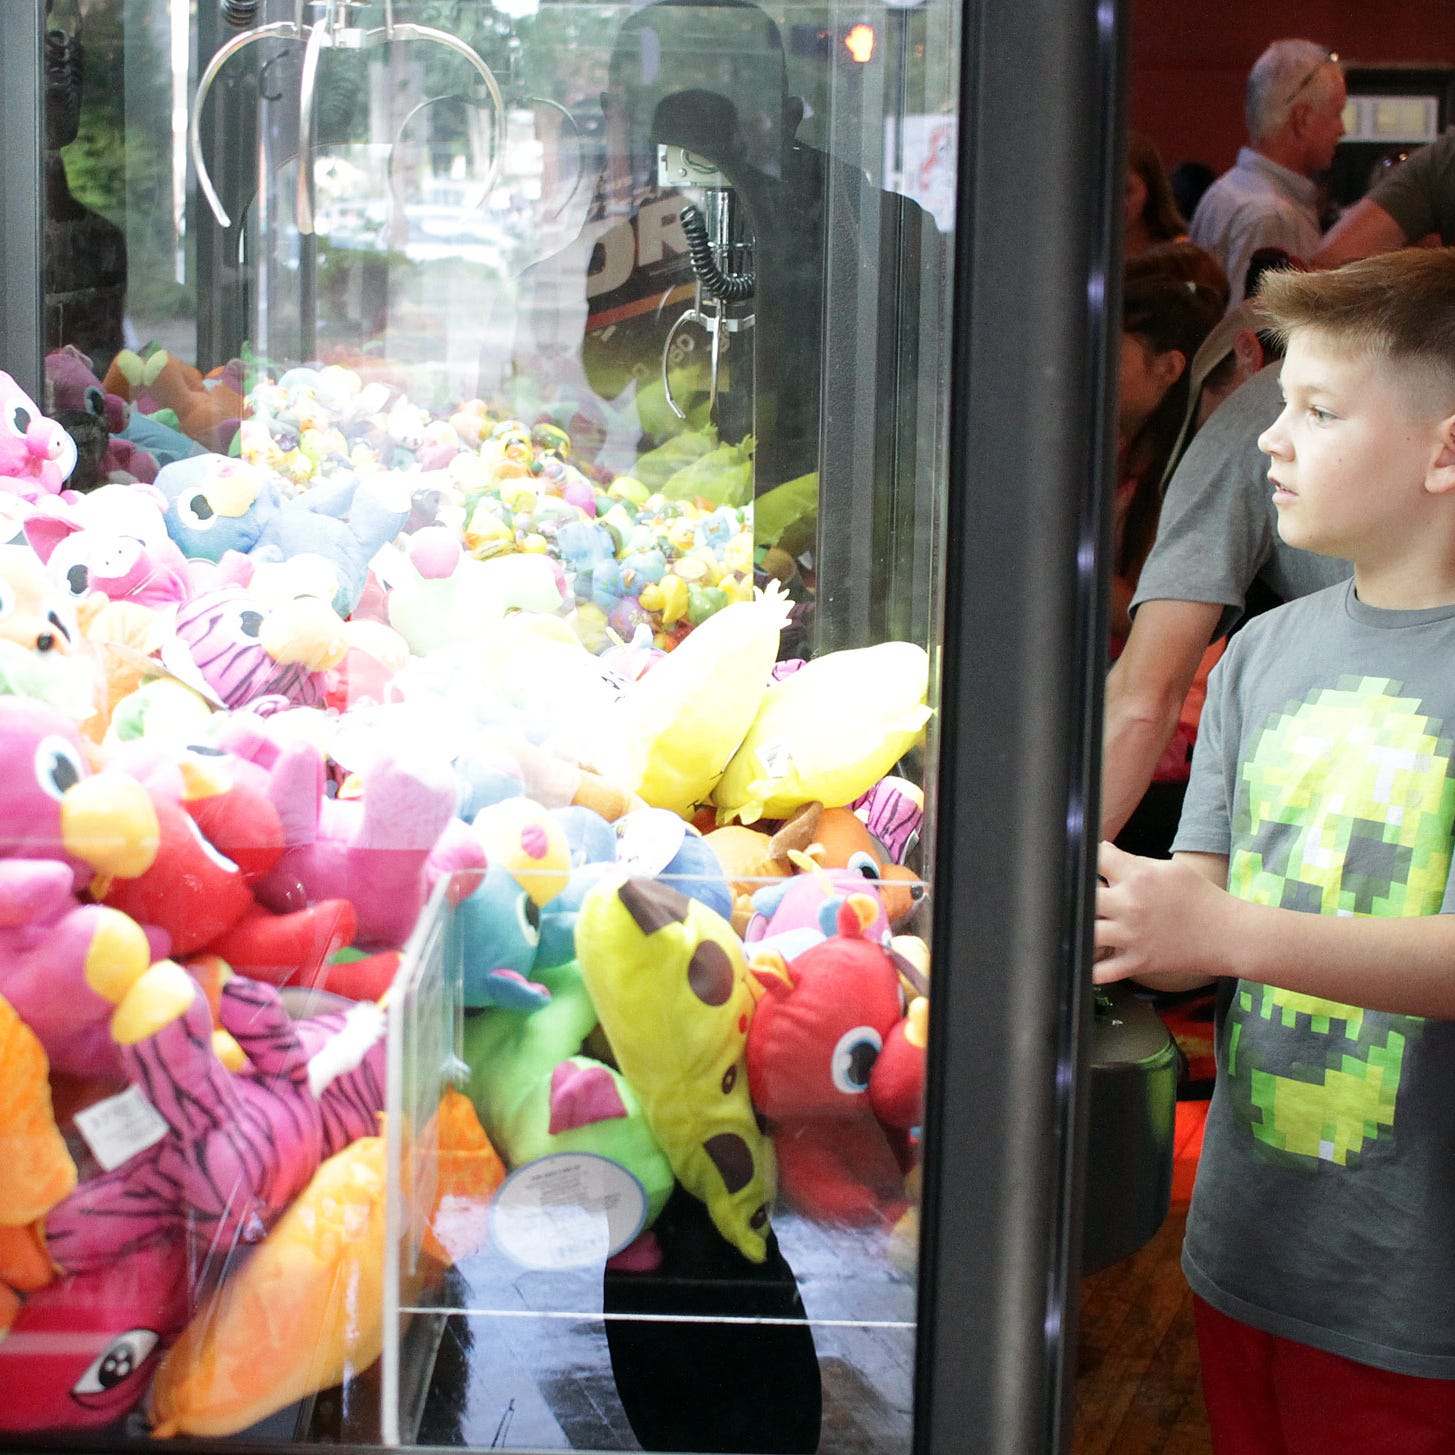 A couple boys try their luck on the claw machine in the game room at Fillys restaurant in Gallatin , TN on Thursday June 21, 2018.  Photo by Dave Cardaciotto 